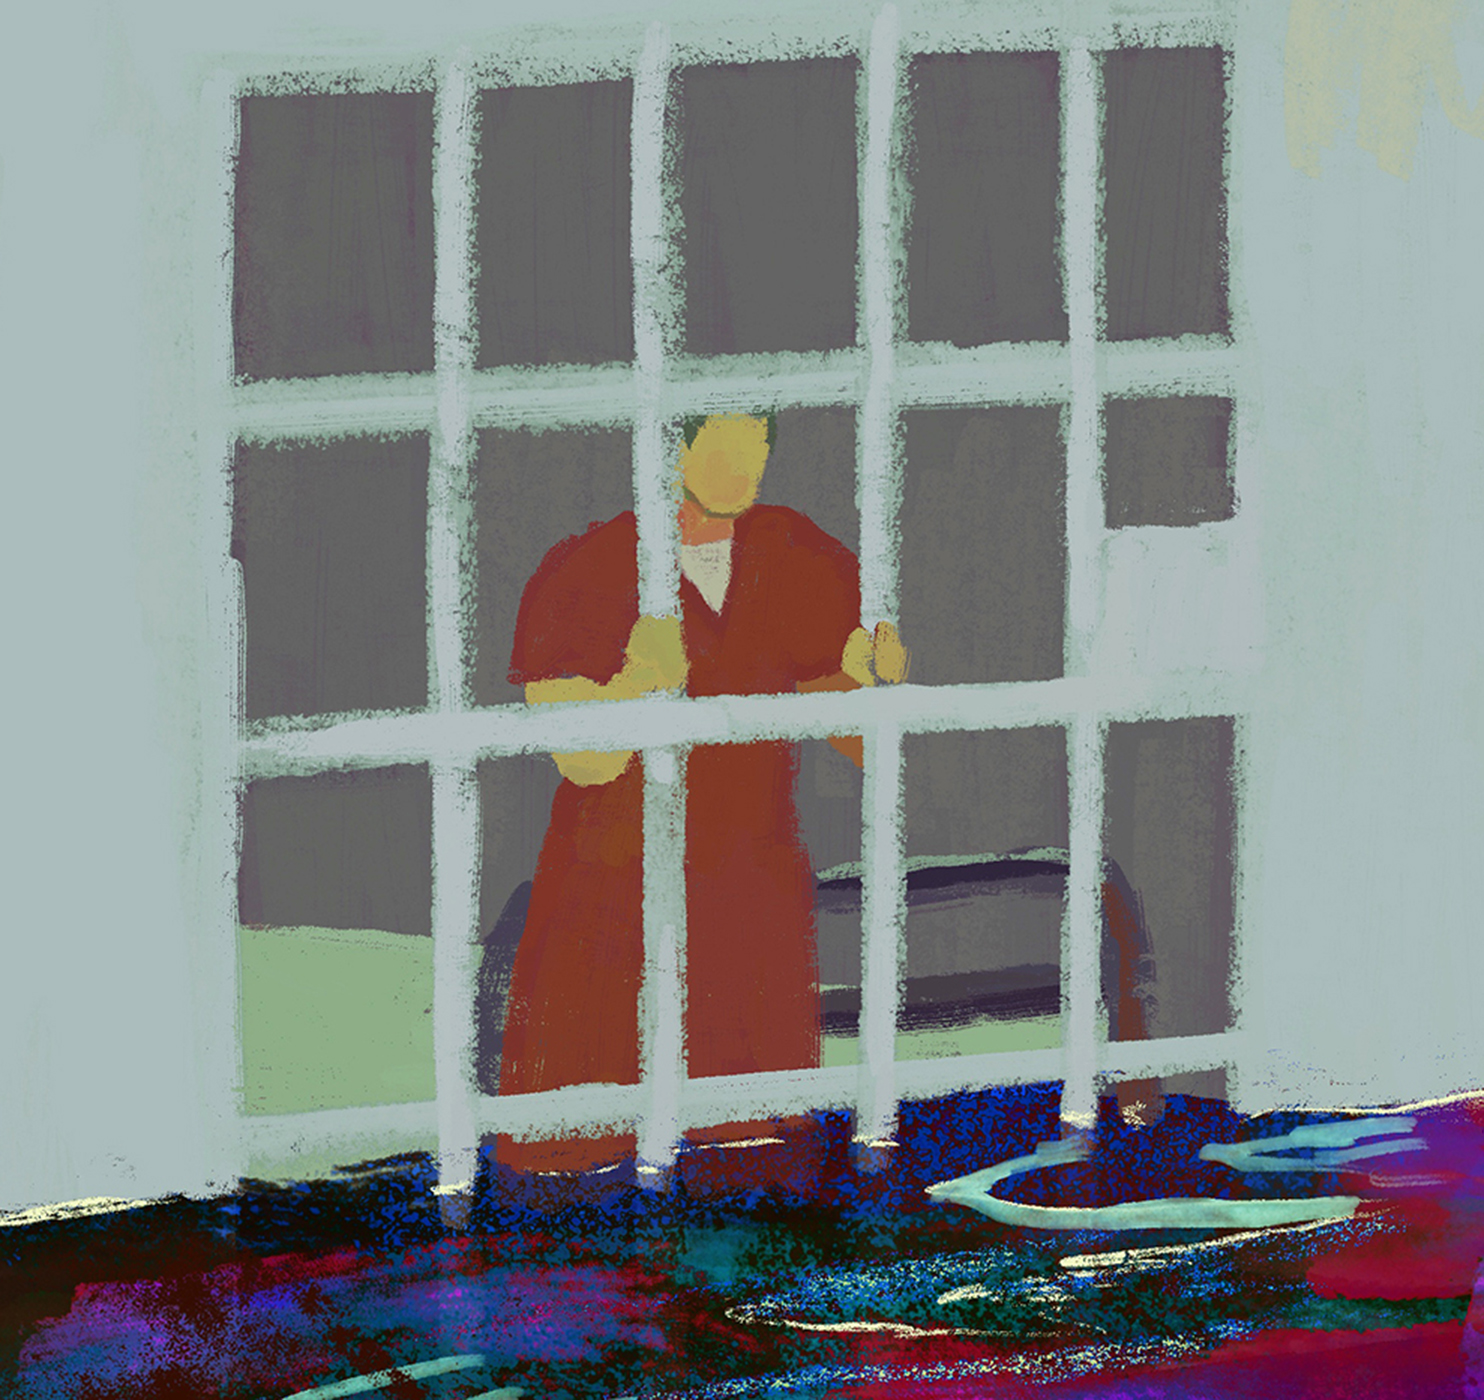 Illustration of an incarcerated person in prison